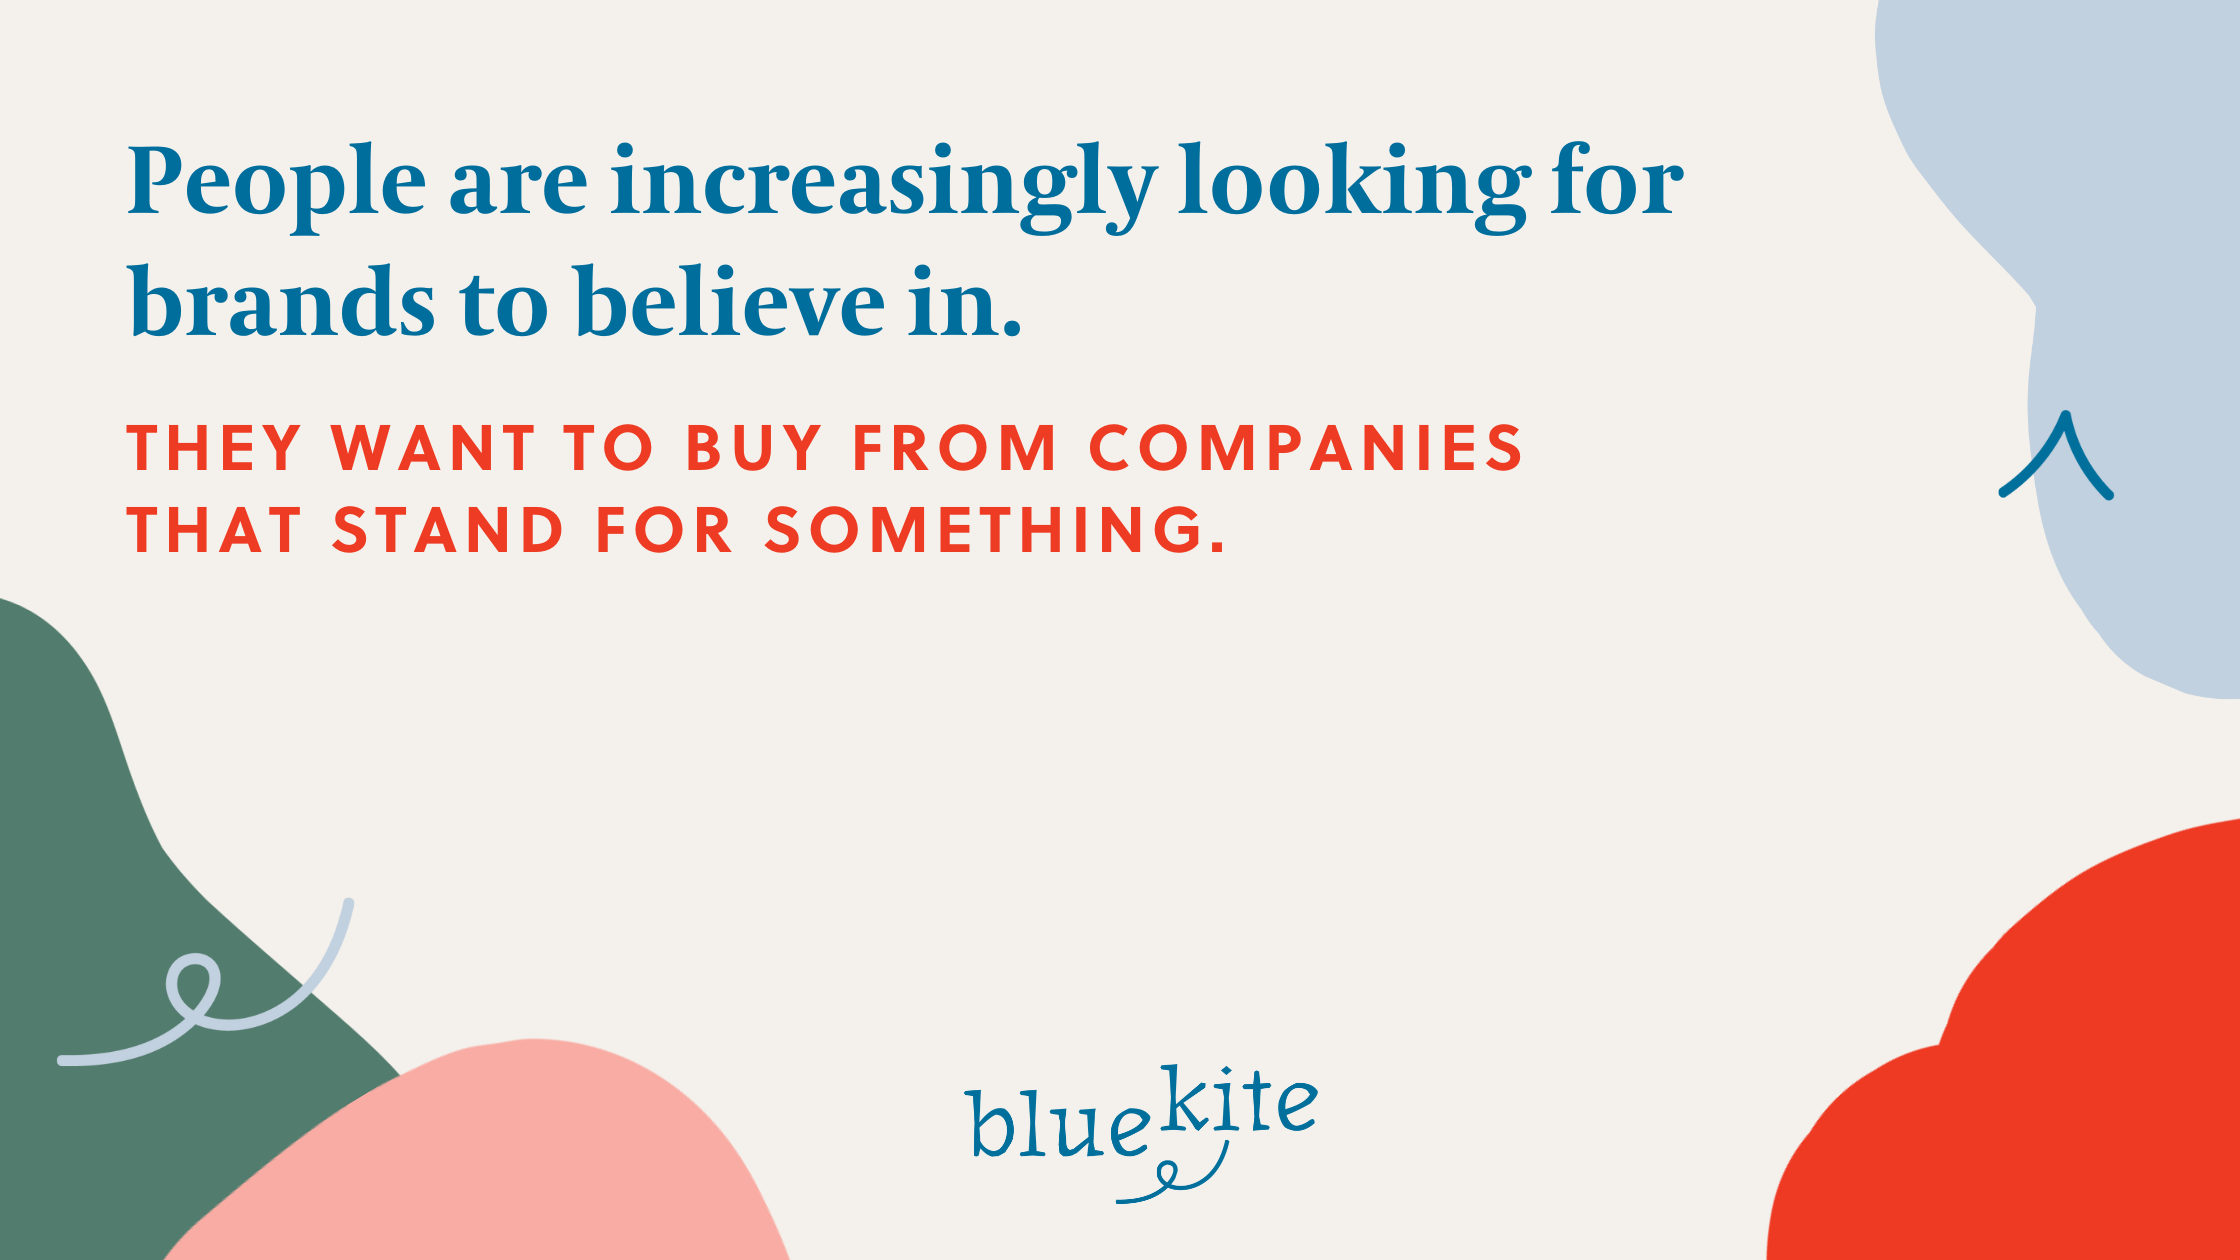 Graphic with the text "People are increasingly looking for brands to believe in. They want to buy from companies that stand for something."